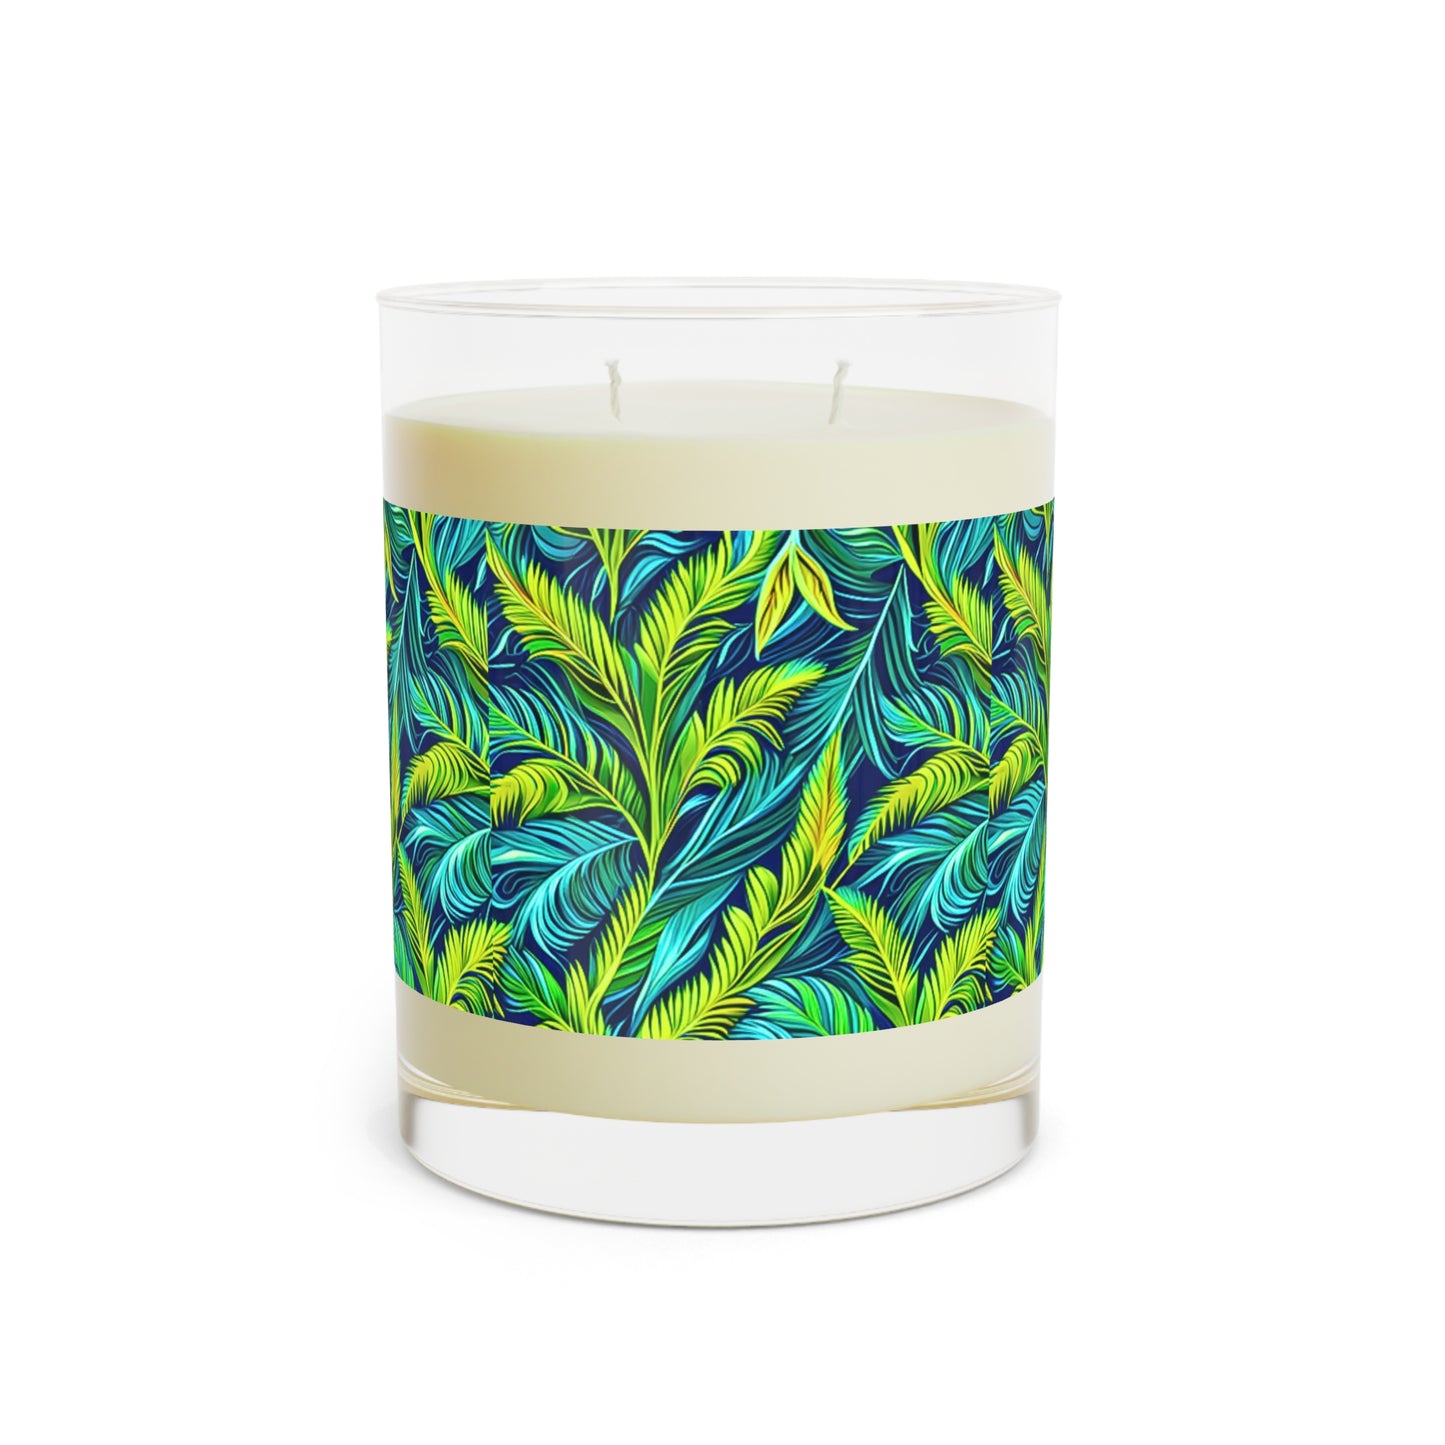 Madagascar Forest Teal Aromatherapy Essential Oils Natural Accent Decorative Scented Candle - Full Glass, 11oz